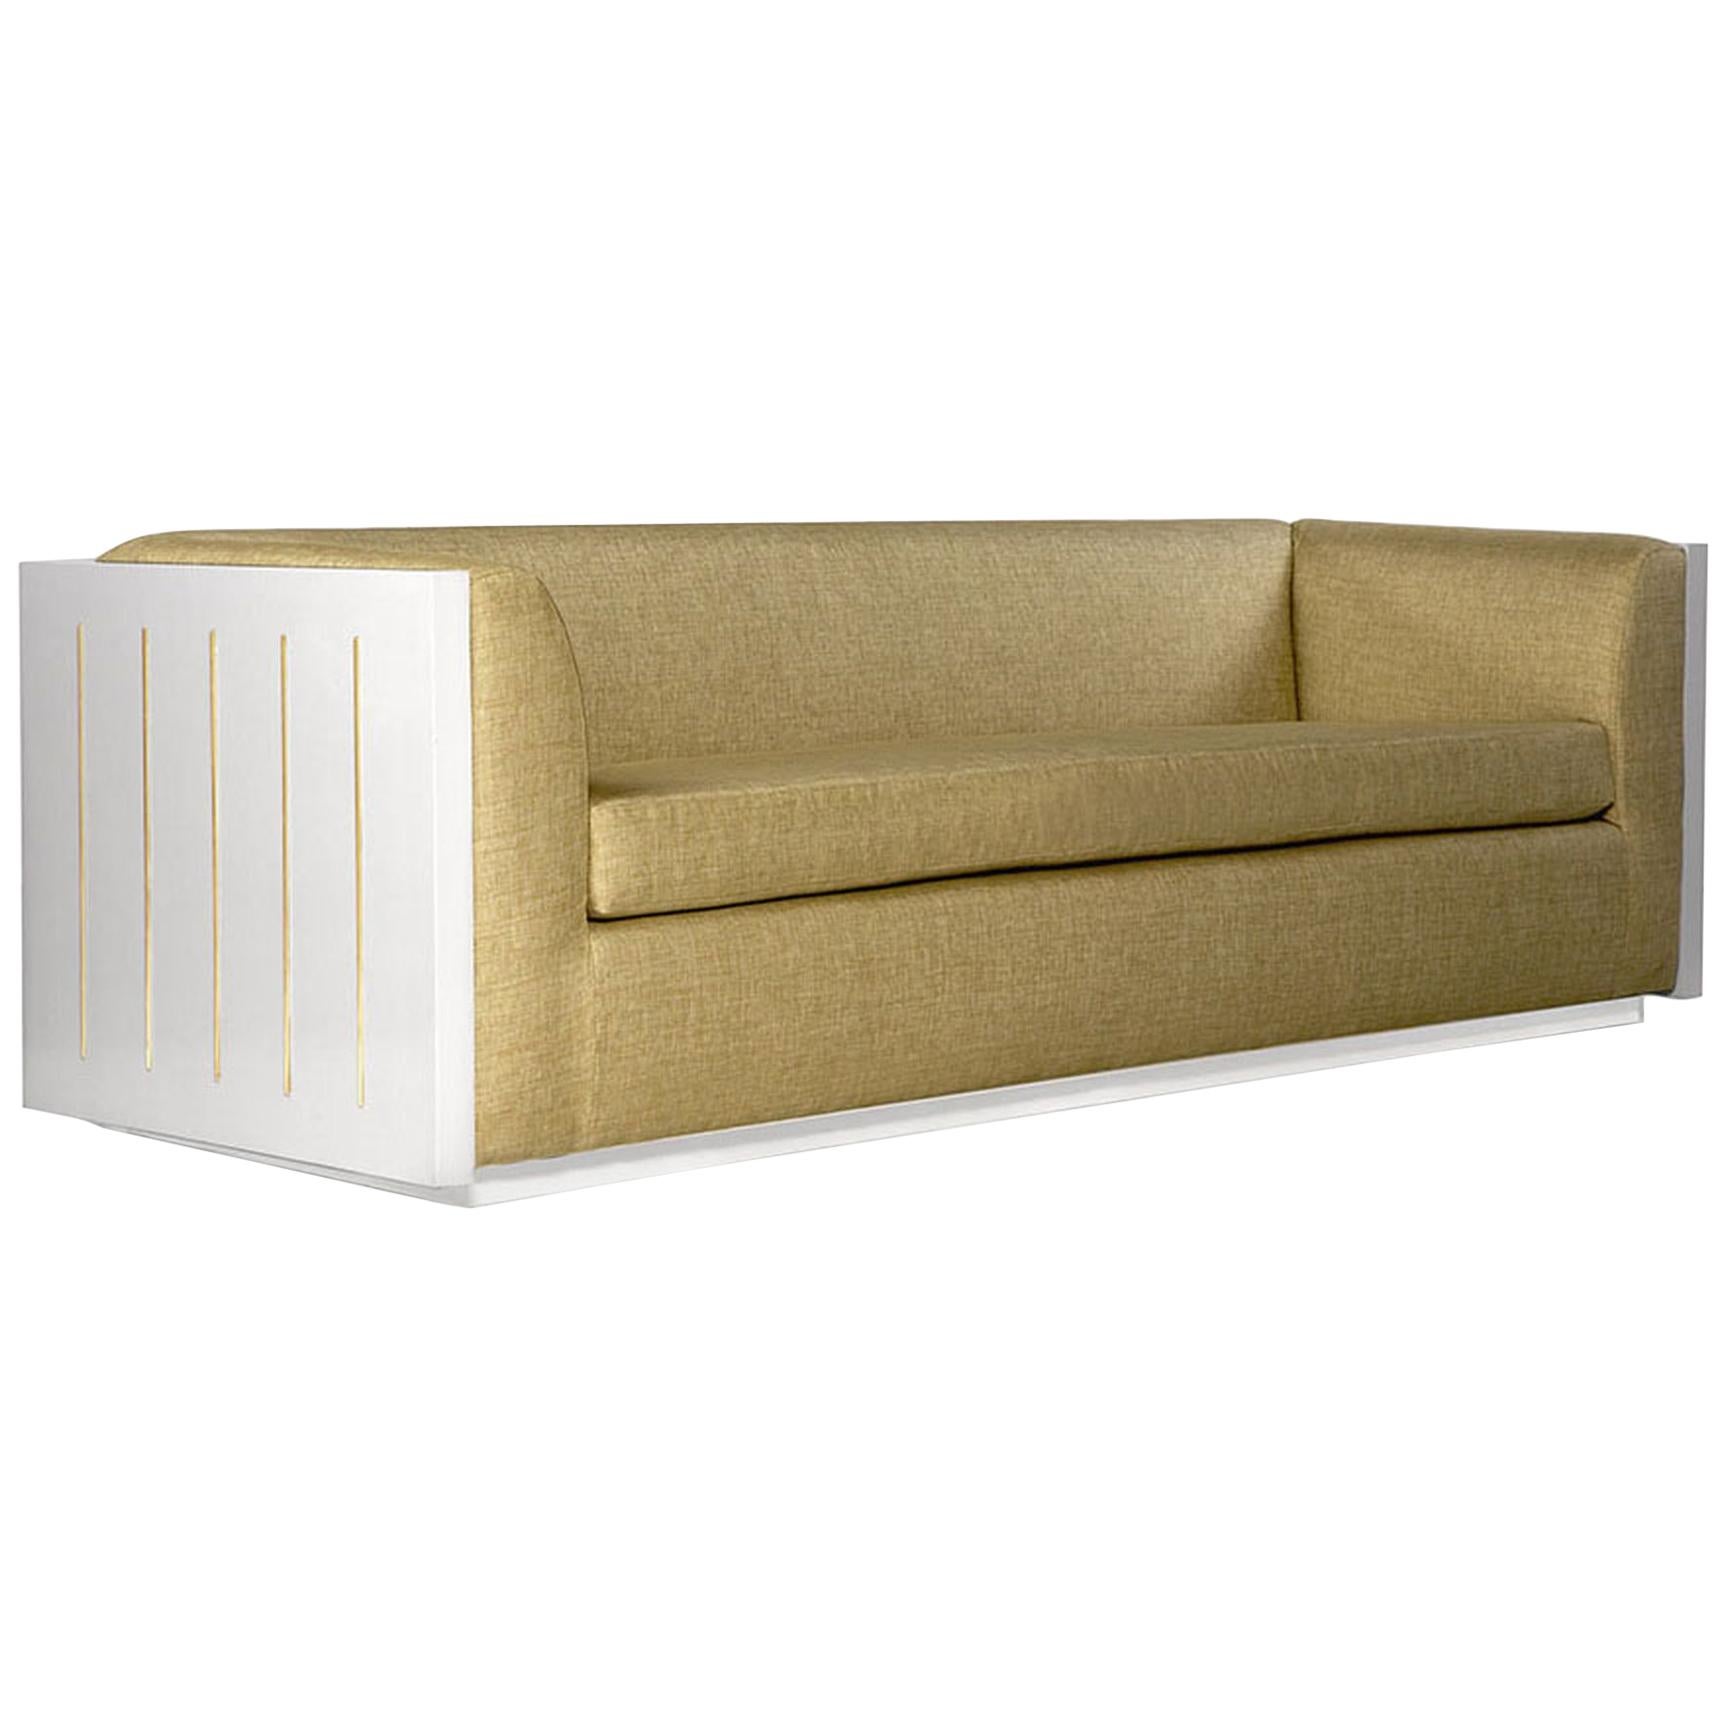 Large Monterey Sofa in Beige with Lacquered Finish by Innova Luxuxy Group For Sale